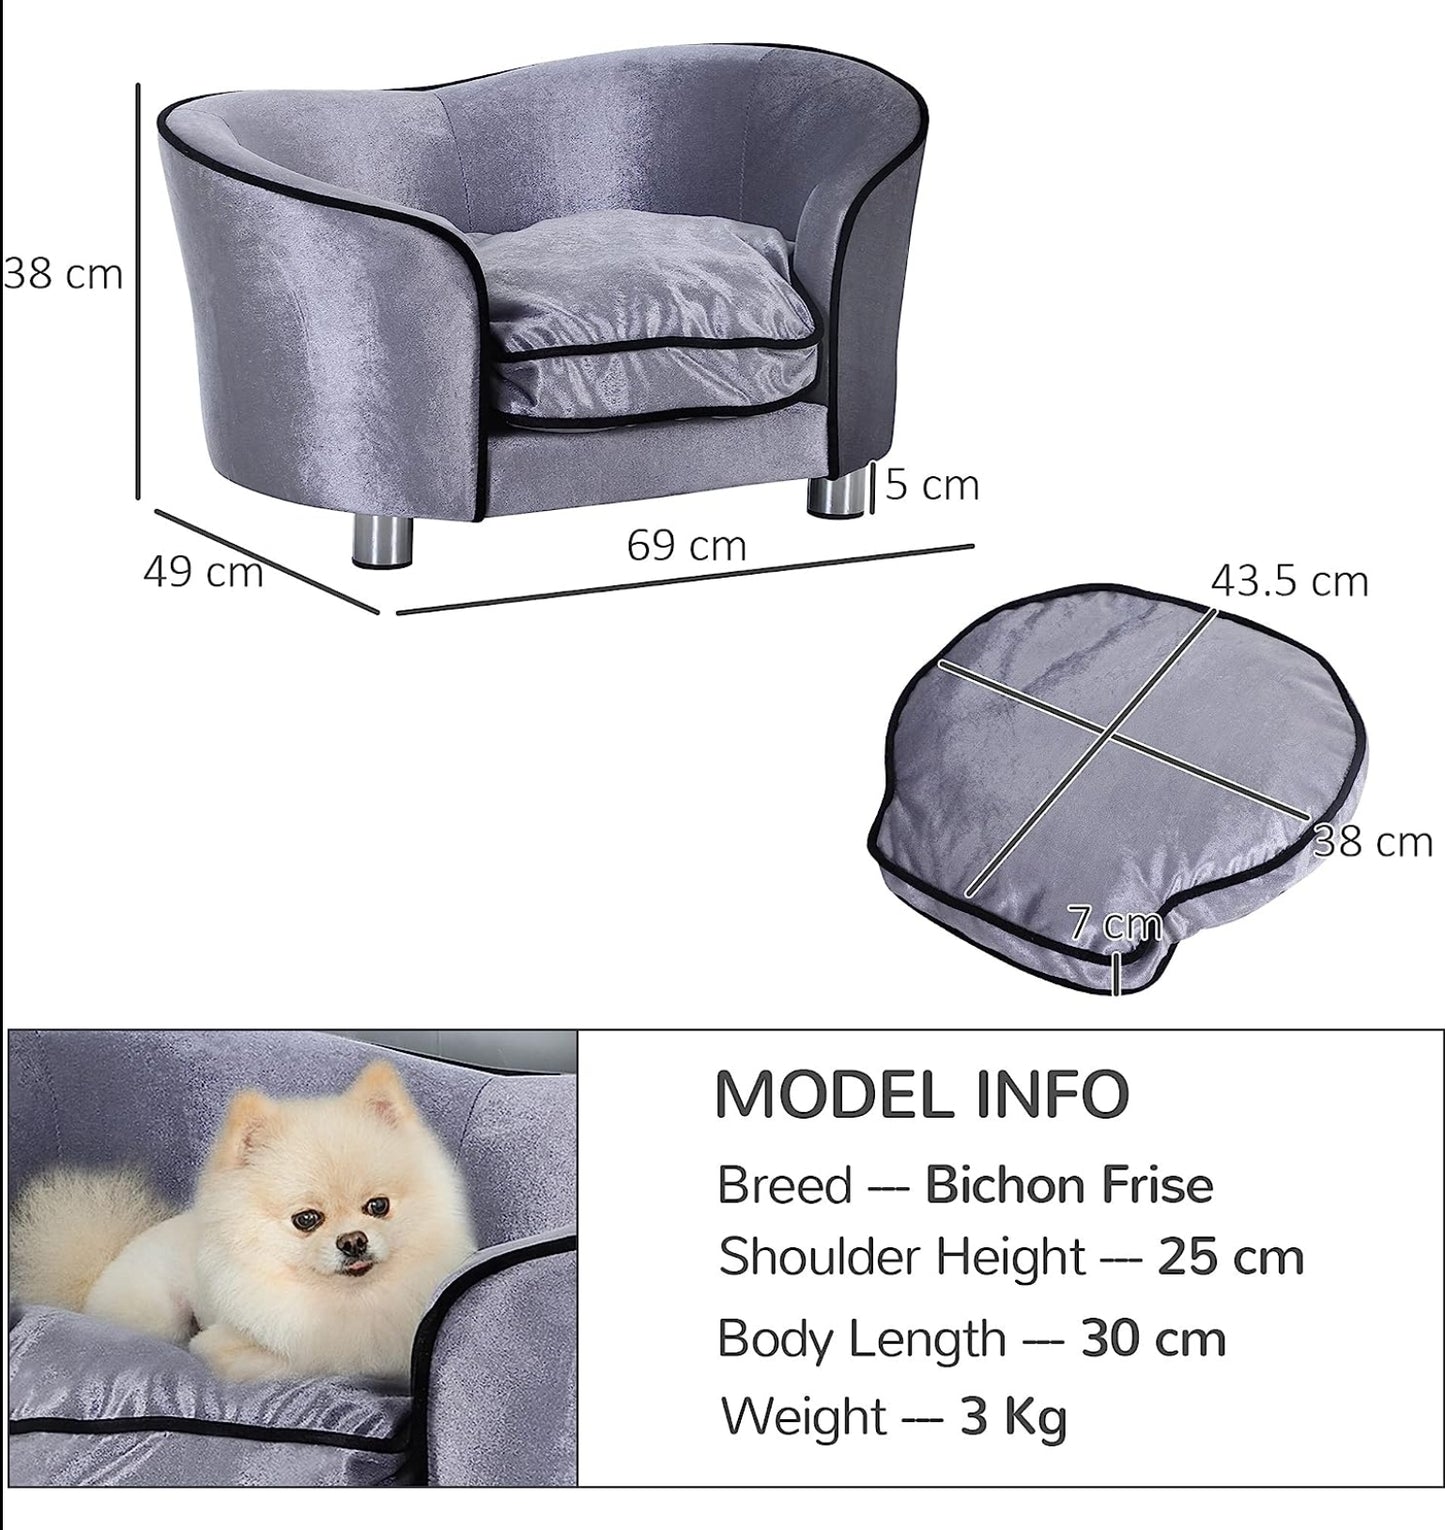 PawHut Dog Sofa Bed for Miniature Dogs, Pet Chair Couch Kitten Lounge with Soft Washable Cushion, Thick Sponge, Wooden Frame, Storage Pocket